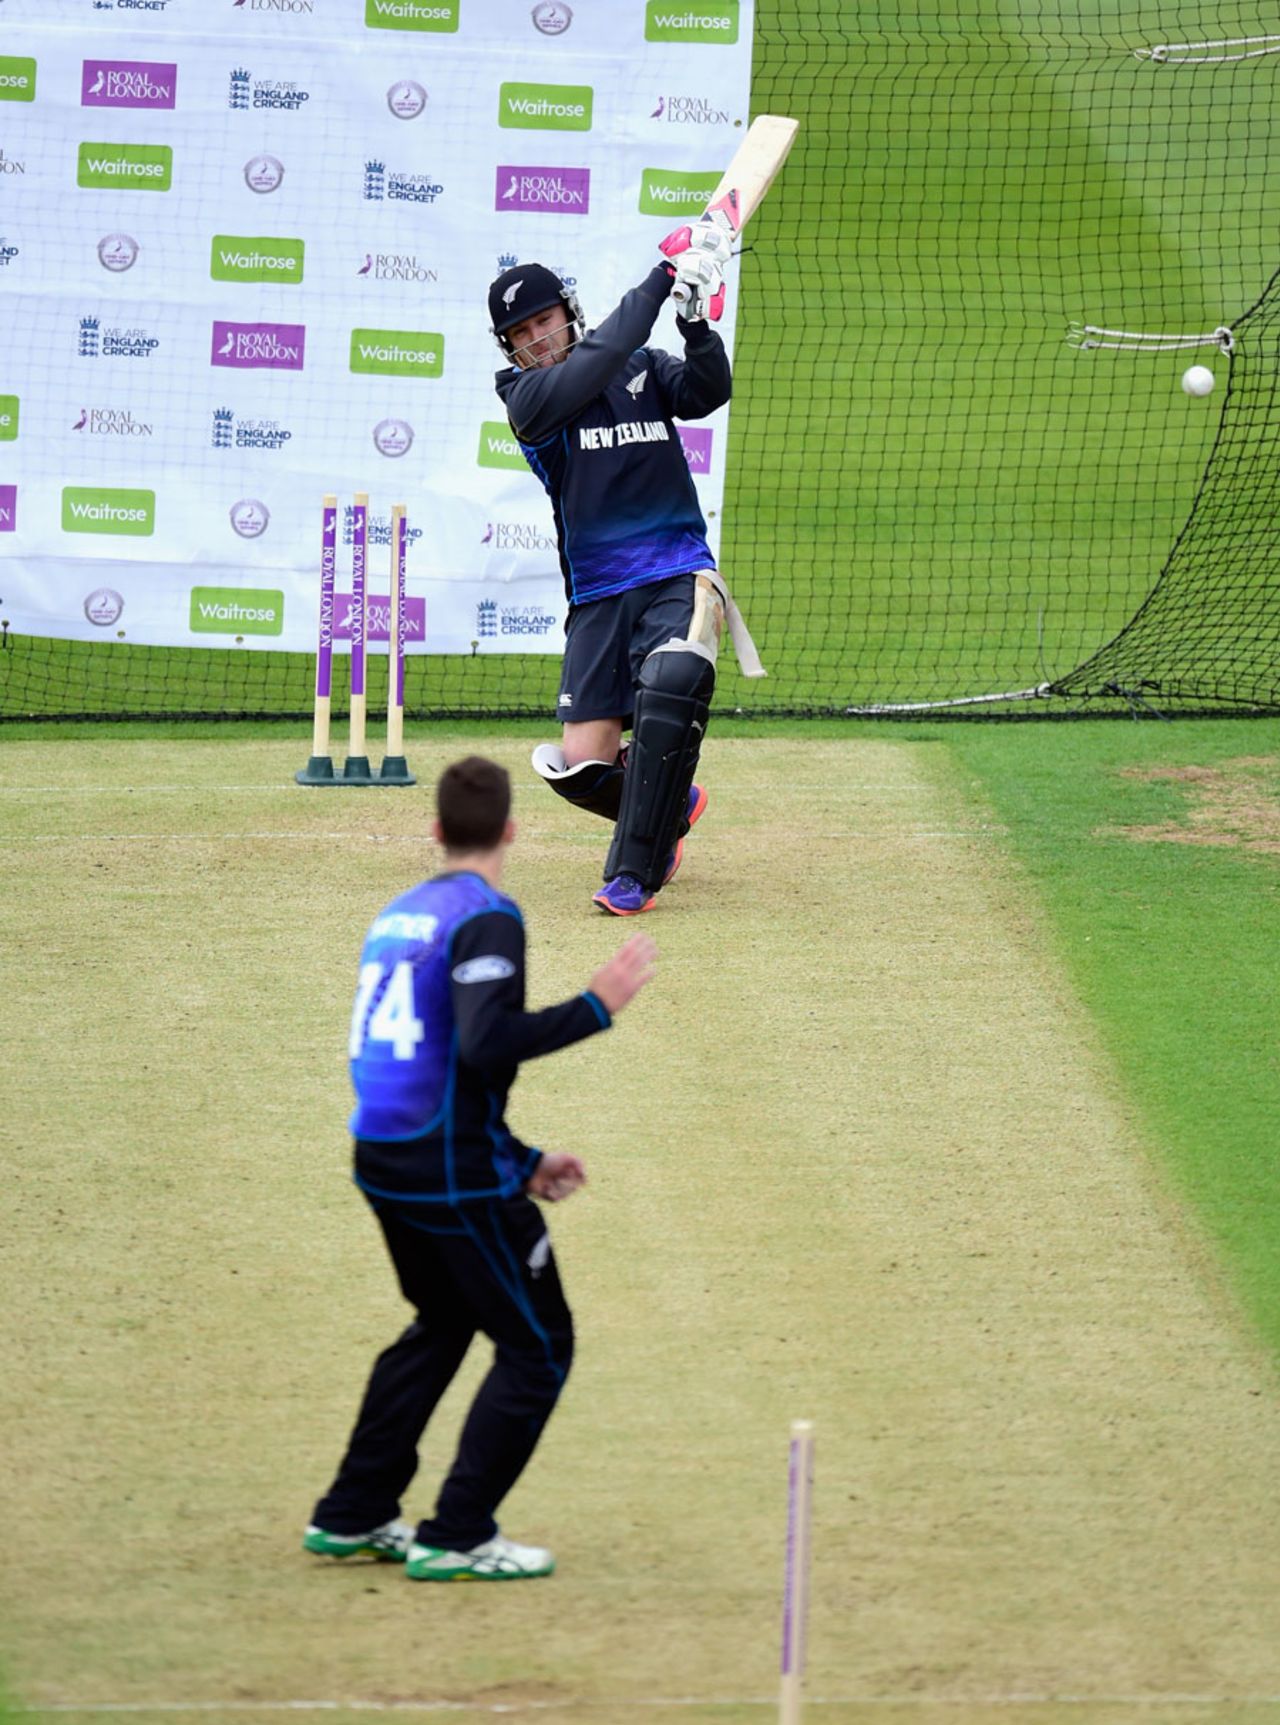 Brendon McCullum attacks in the nets, Chester-le-Street, June 19, 205